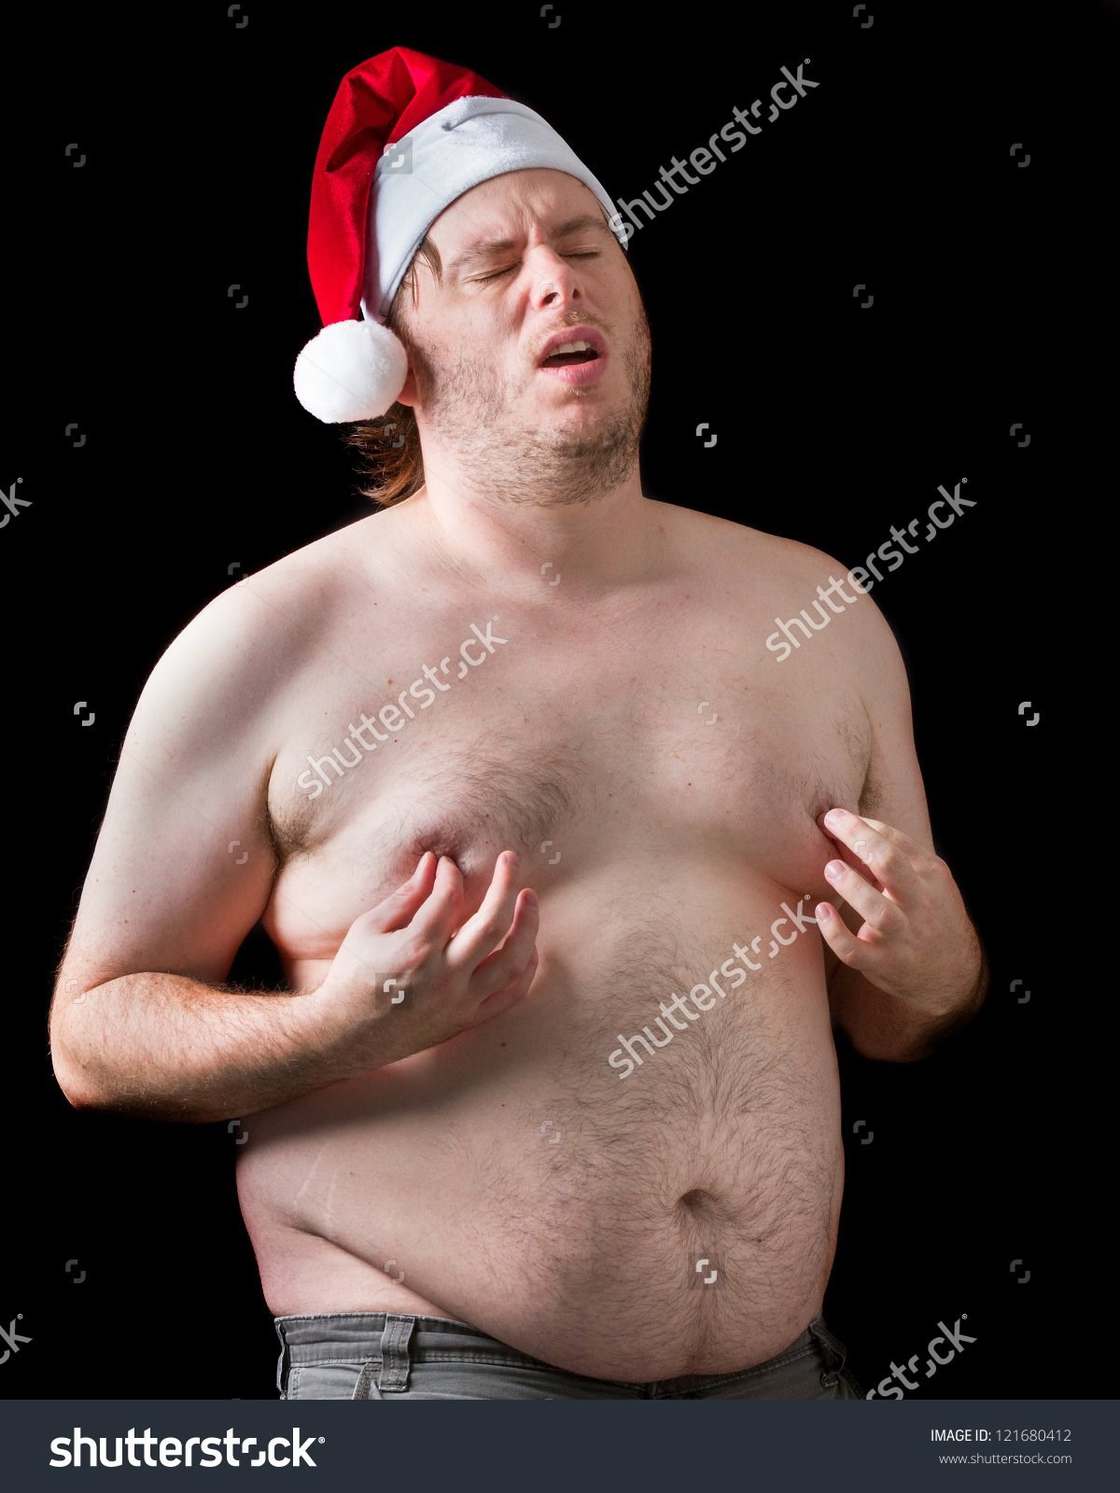 Fat man wearing Santa Clause hat and pinching his nipples while showing euphoric agony on his face.